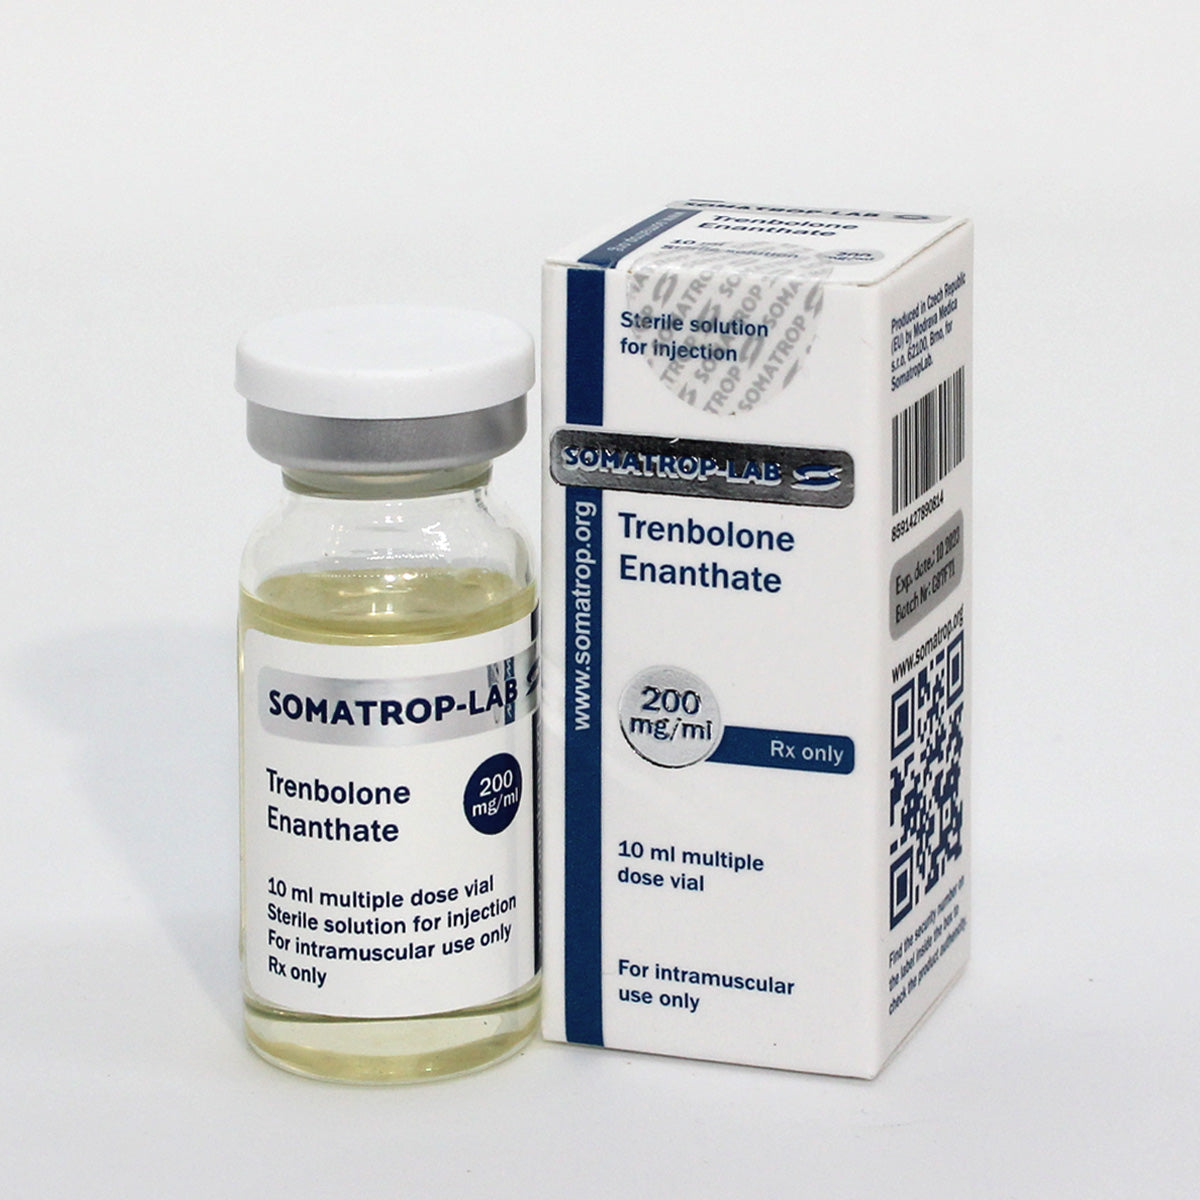 Somatrop-Lab Trenbolone Enanthate: 10ml vial, 200mg/ml. Front of the packaging.